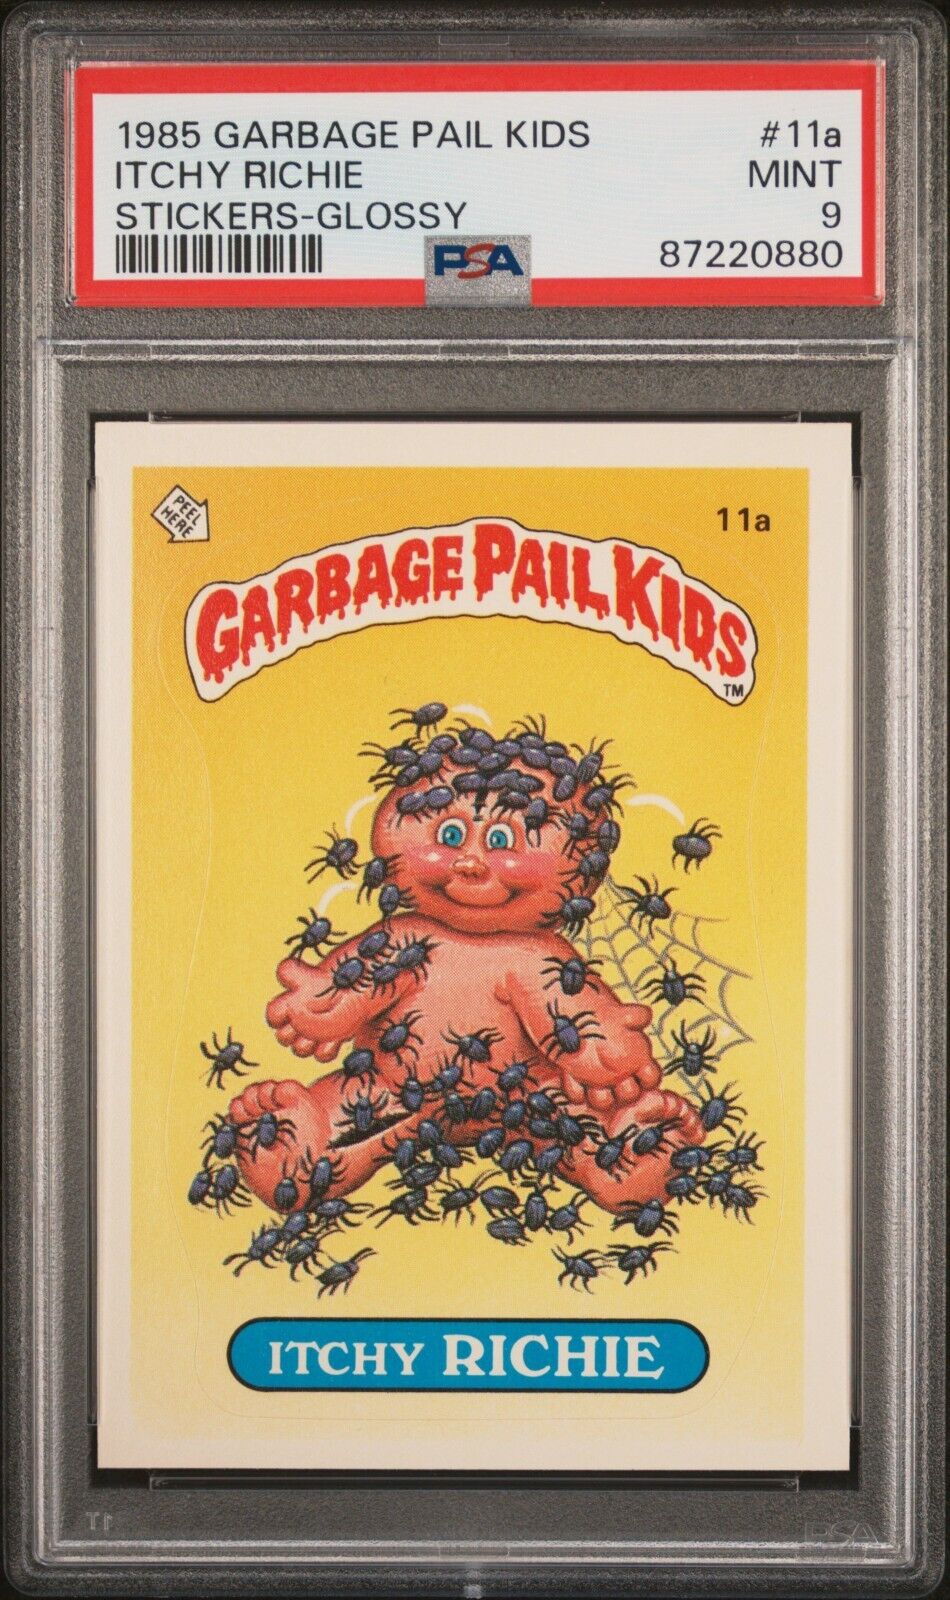 1985 Topps Garbage Pail Kids OS1 Series 1 Itchy Richie 11a GLOSSY Card PSA 9 M